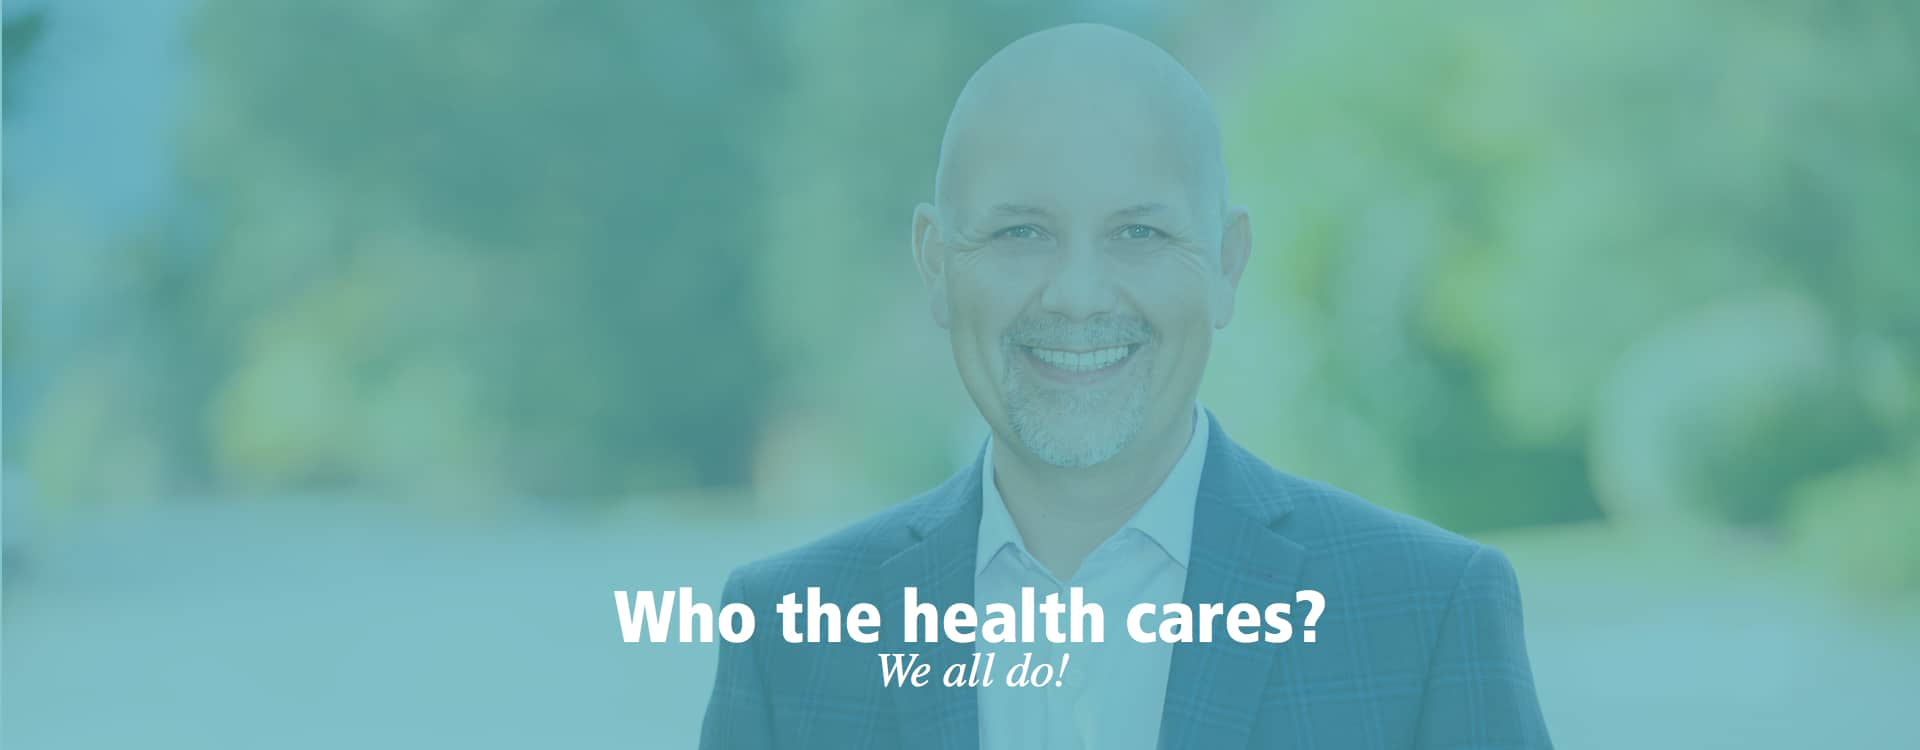 Who the health cares? We all do!